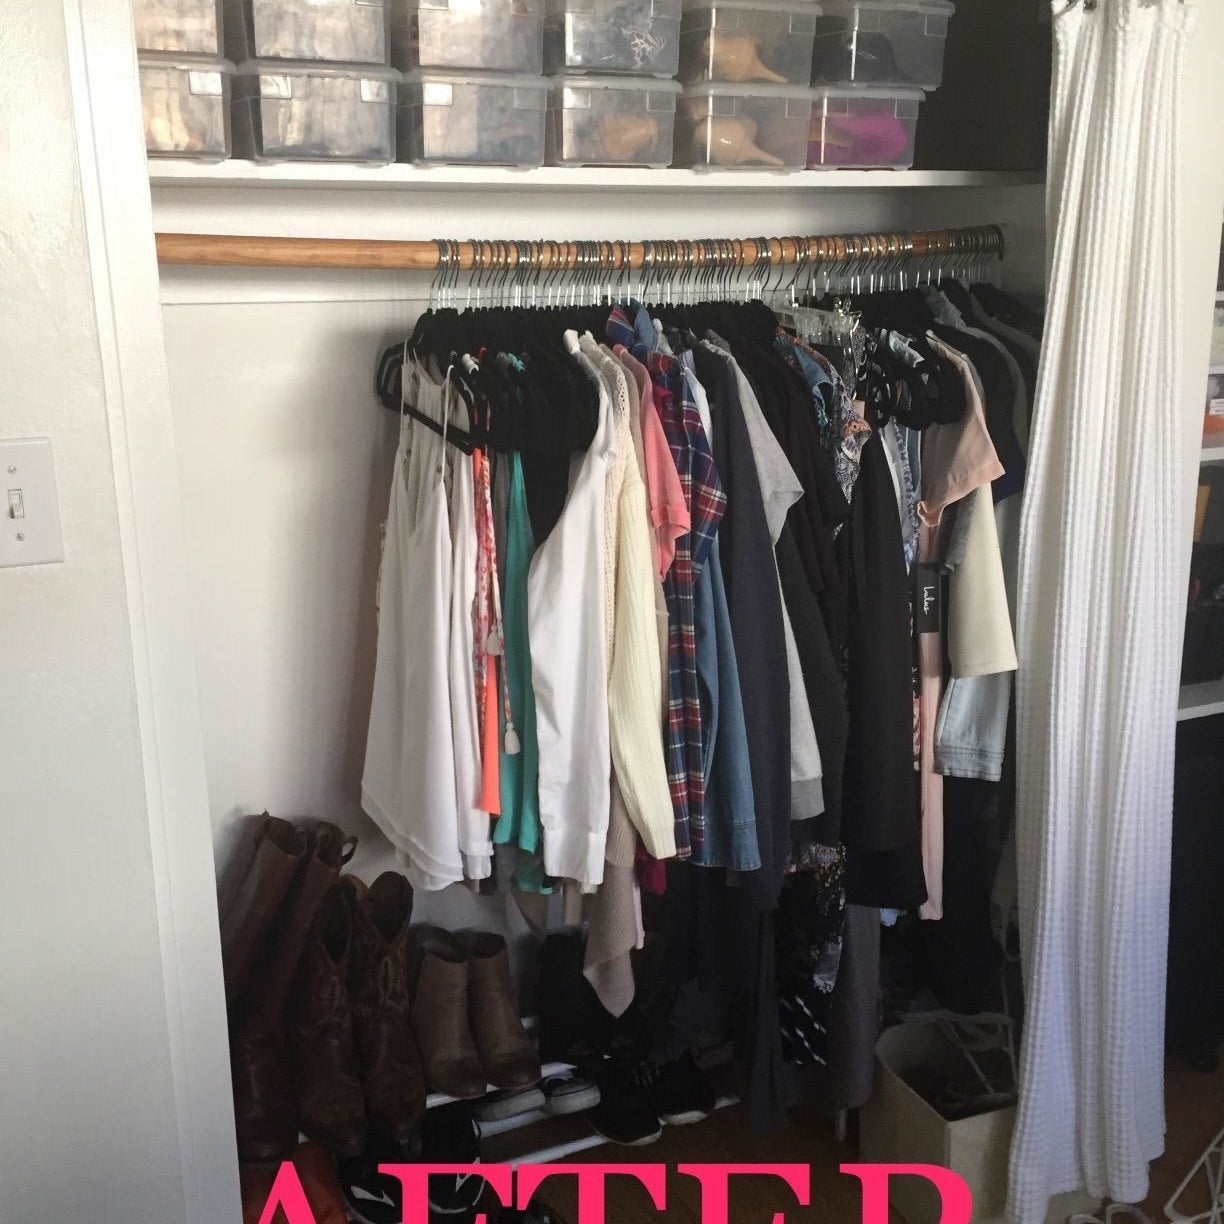 24 Clothing Organizers For People Whose Closets Are Overflowing